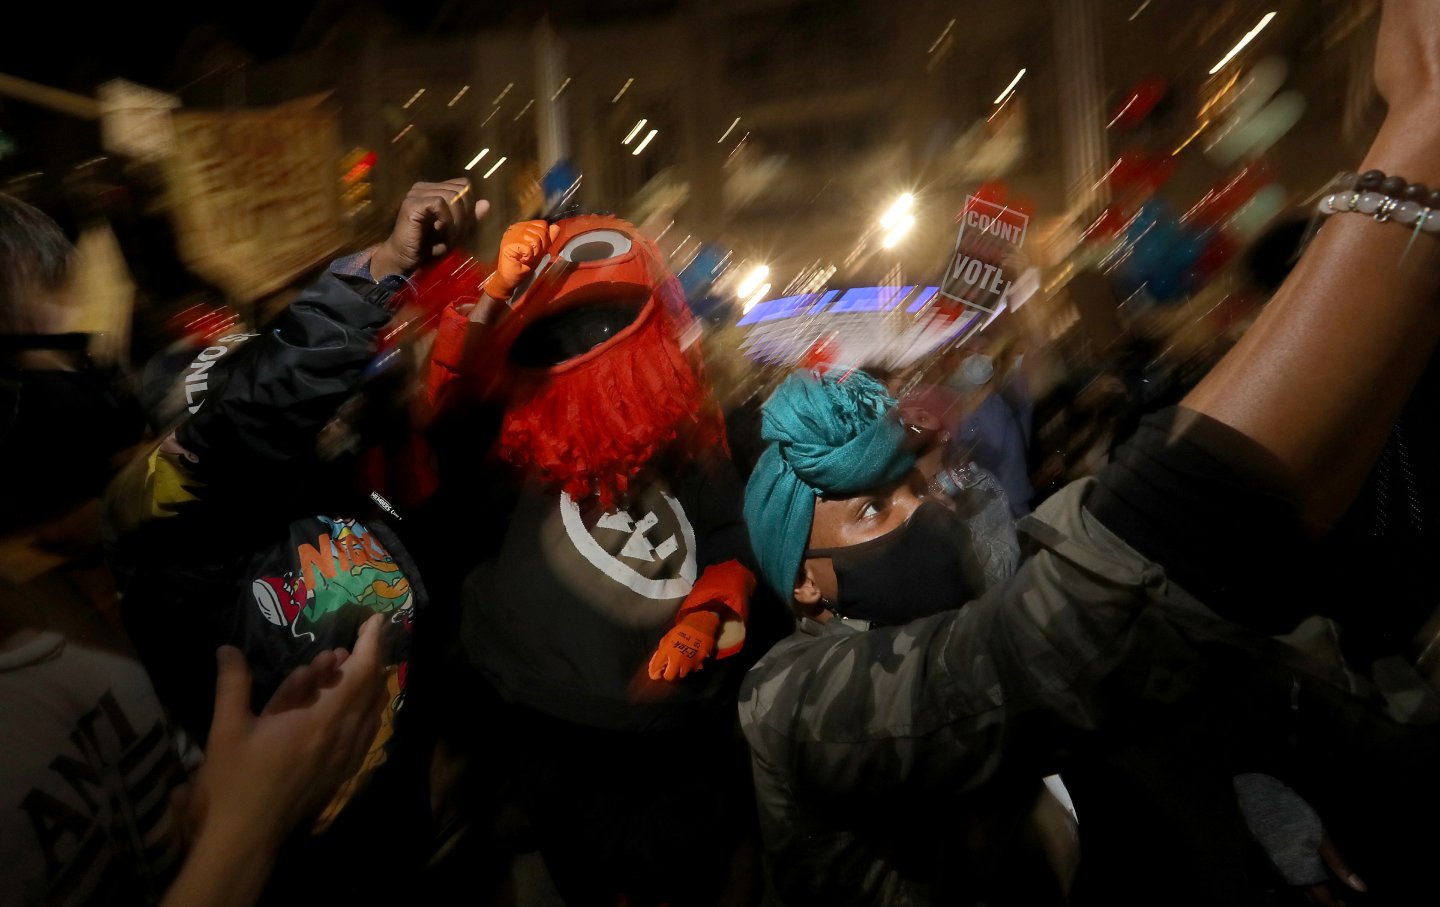 Gritty's 2020 presidential election: How Philadelphia's mascot became a  November icon.